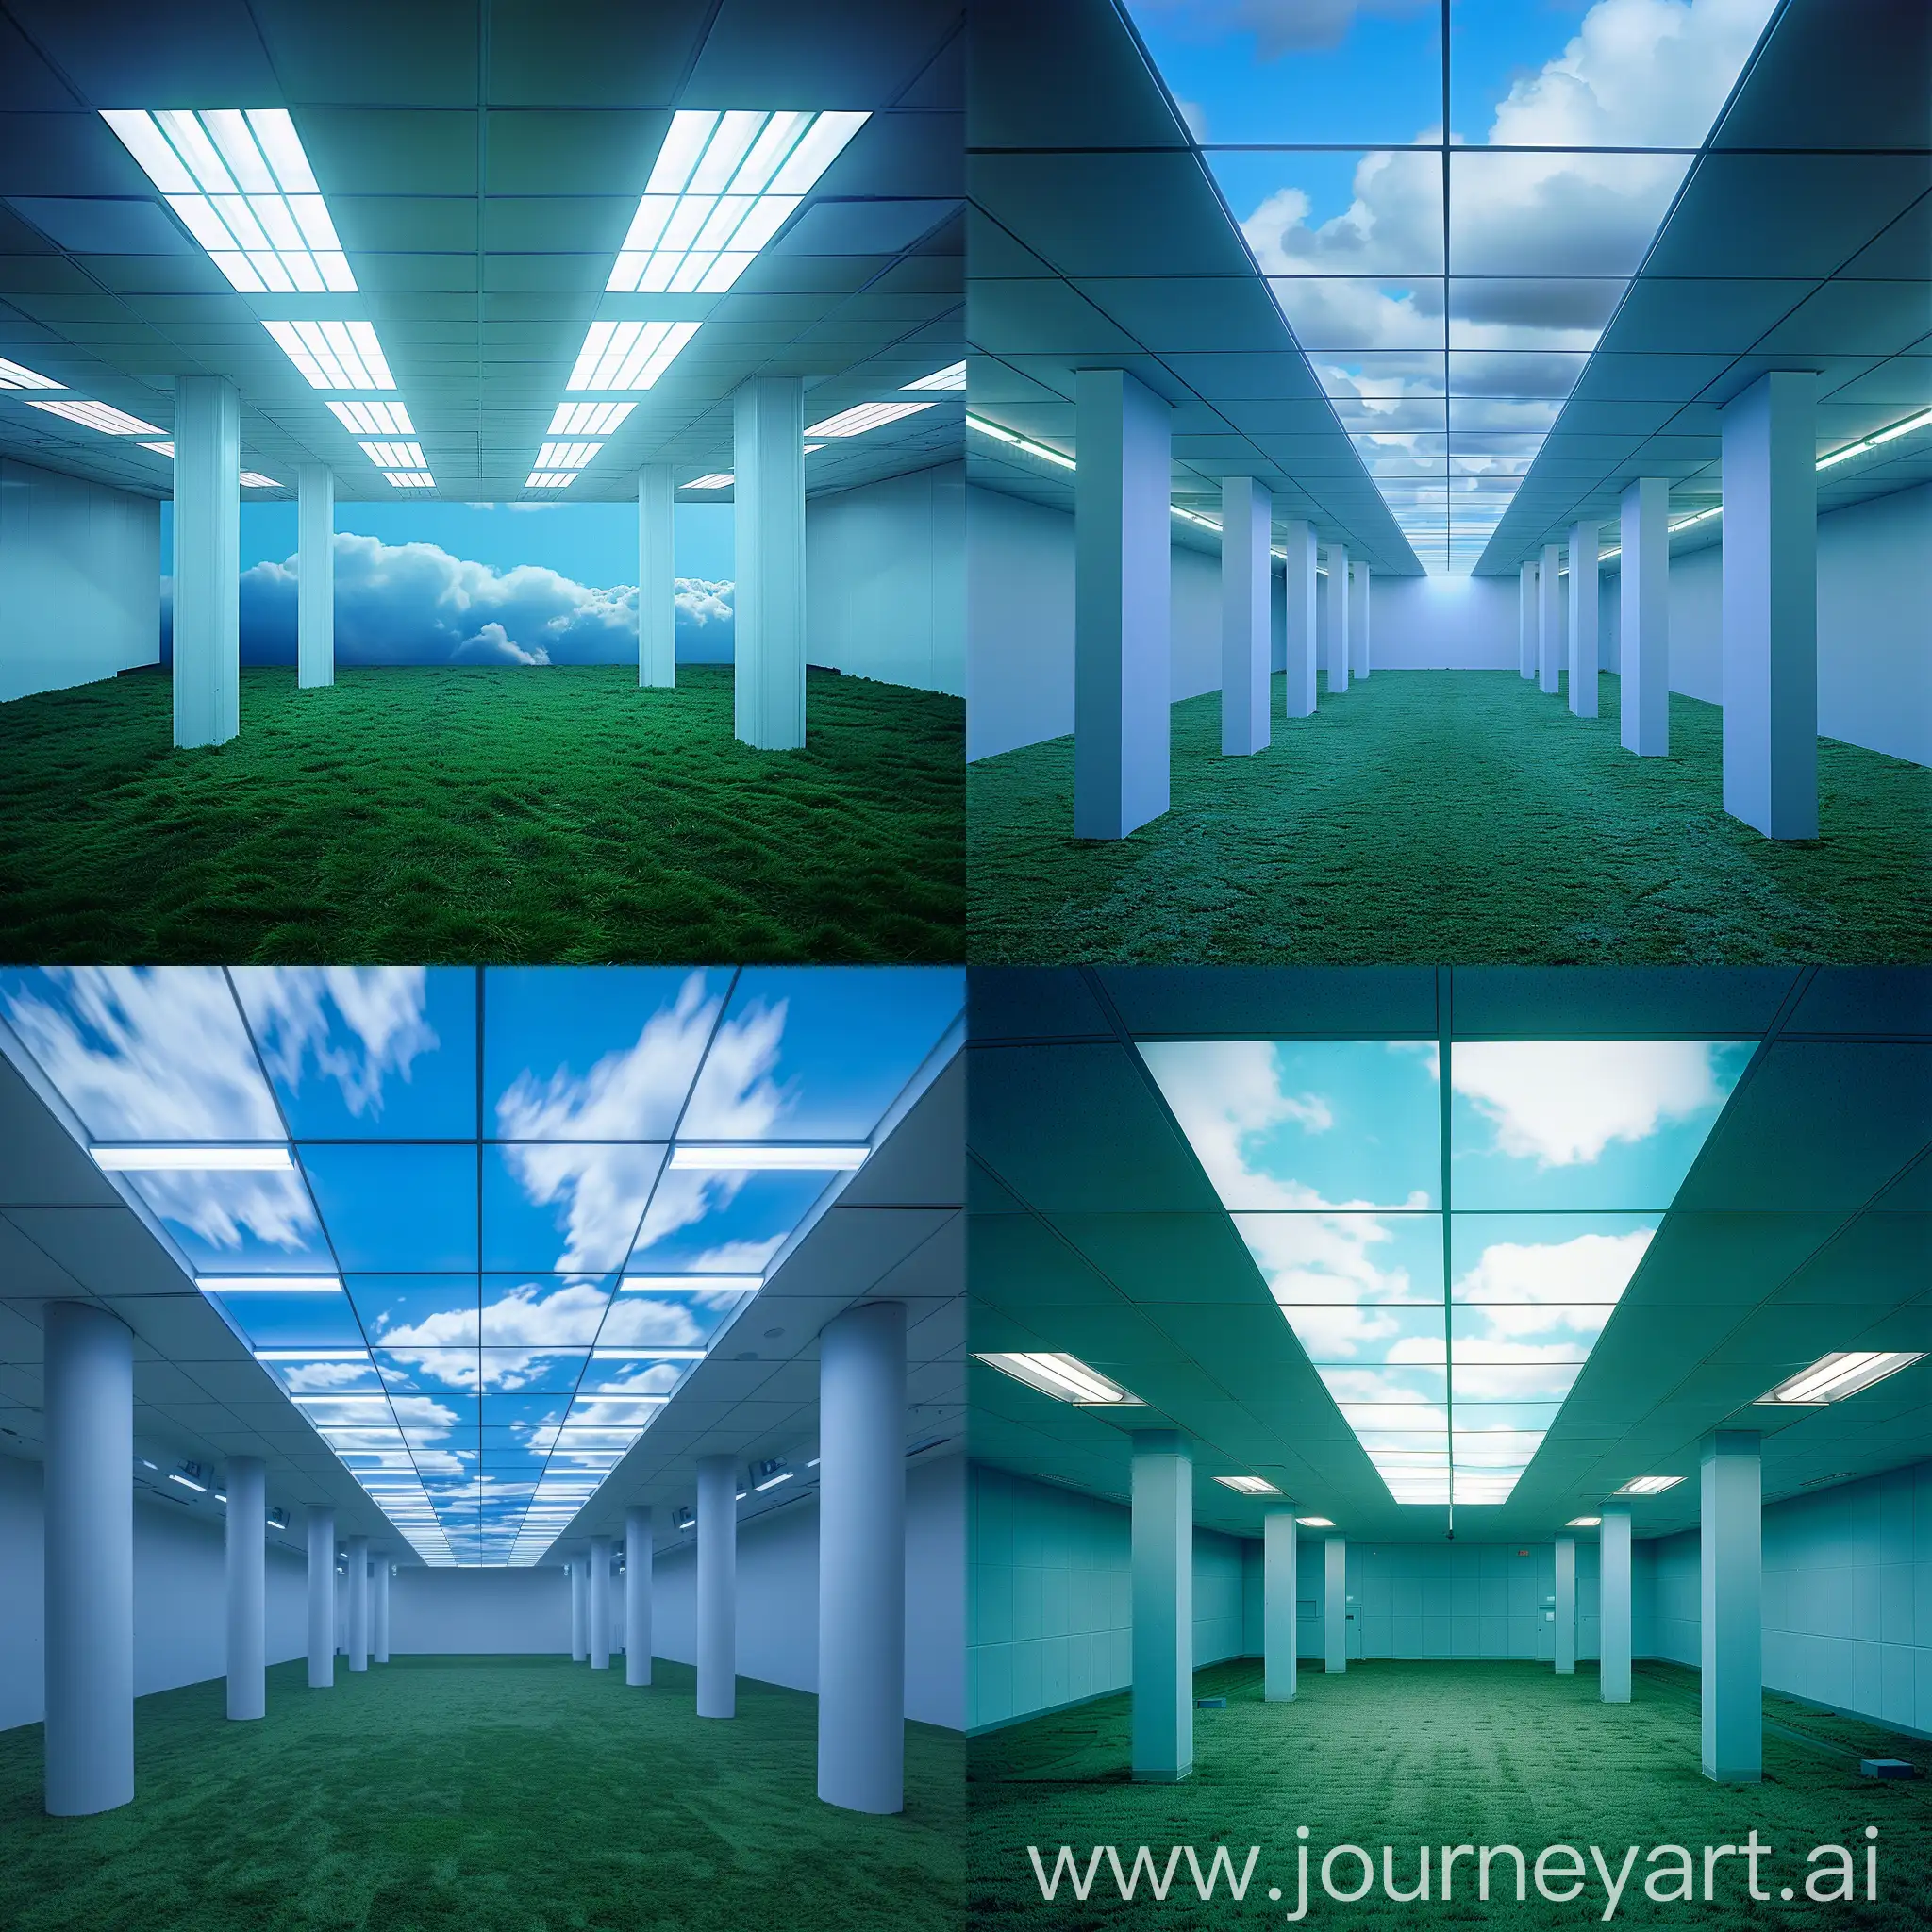 Blue sky and clouds, an empty airport room with a grass floor, rectangular pillars, liminal space, real photograph, drop ceiling, fluorescent lighting, dim lighting.